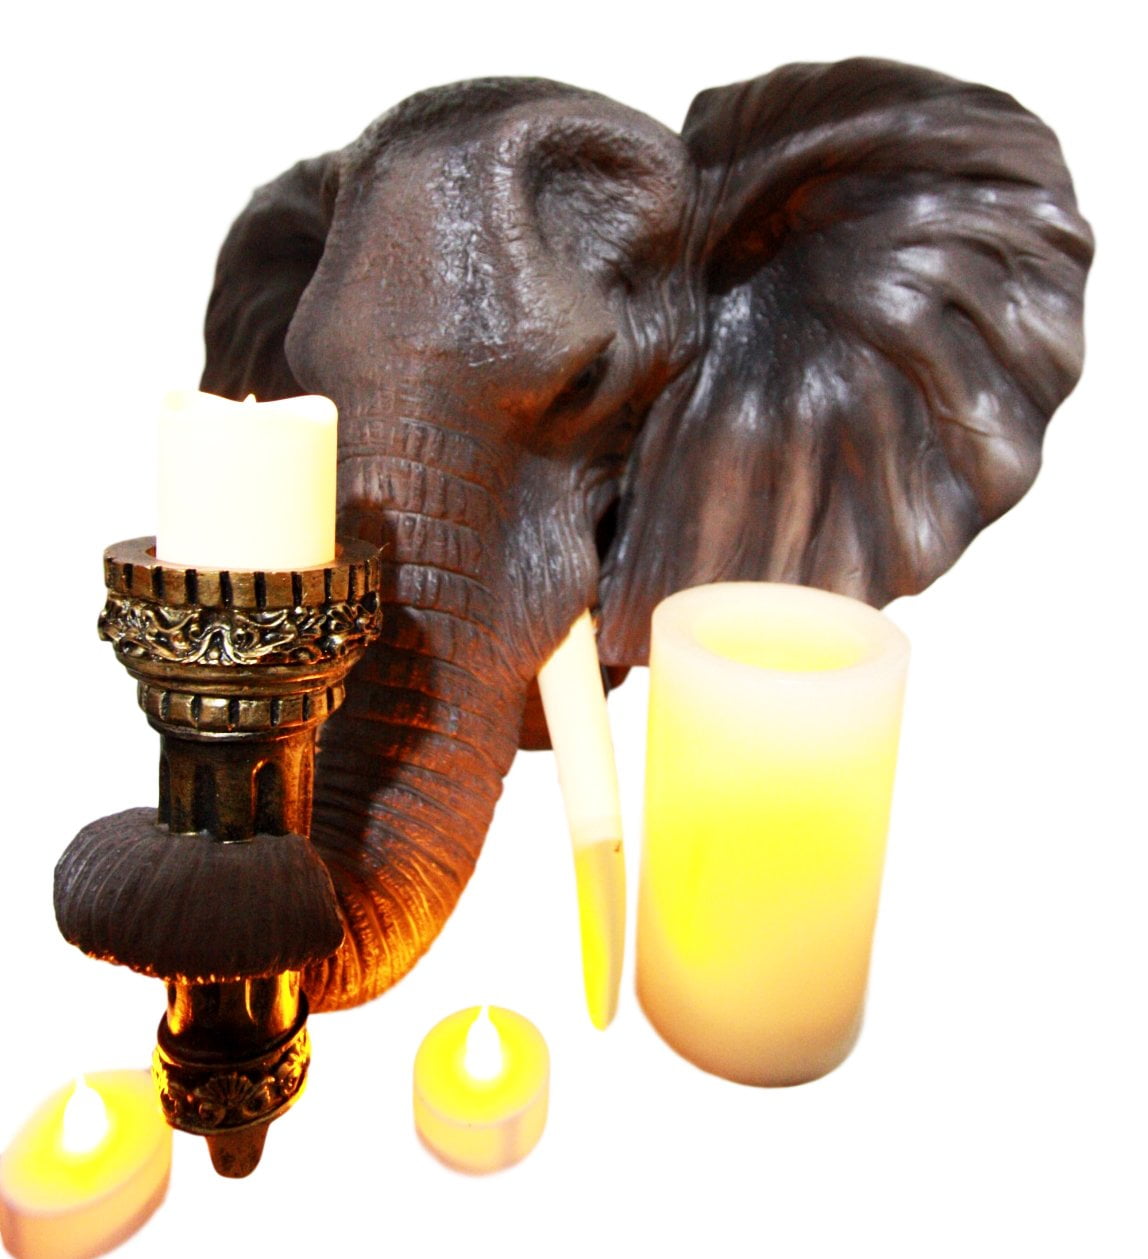 Wall Mounted Asian Candle Holders